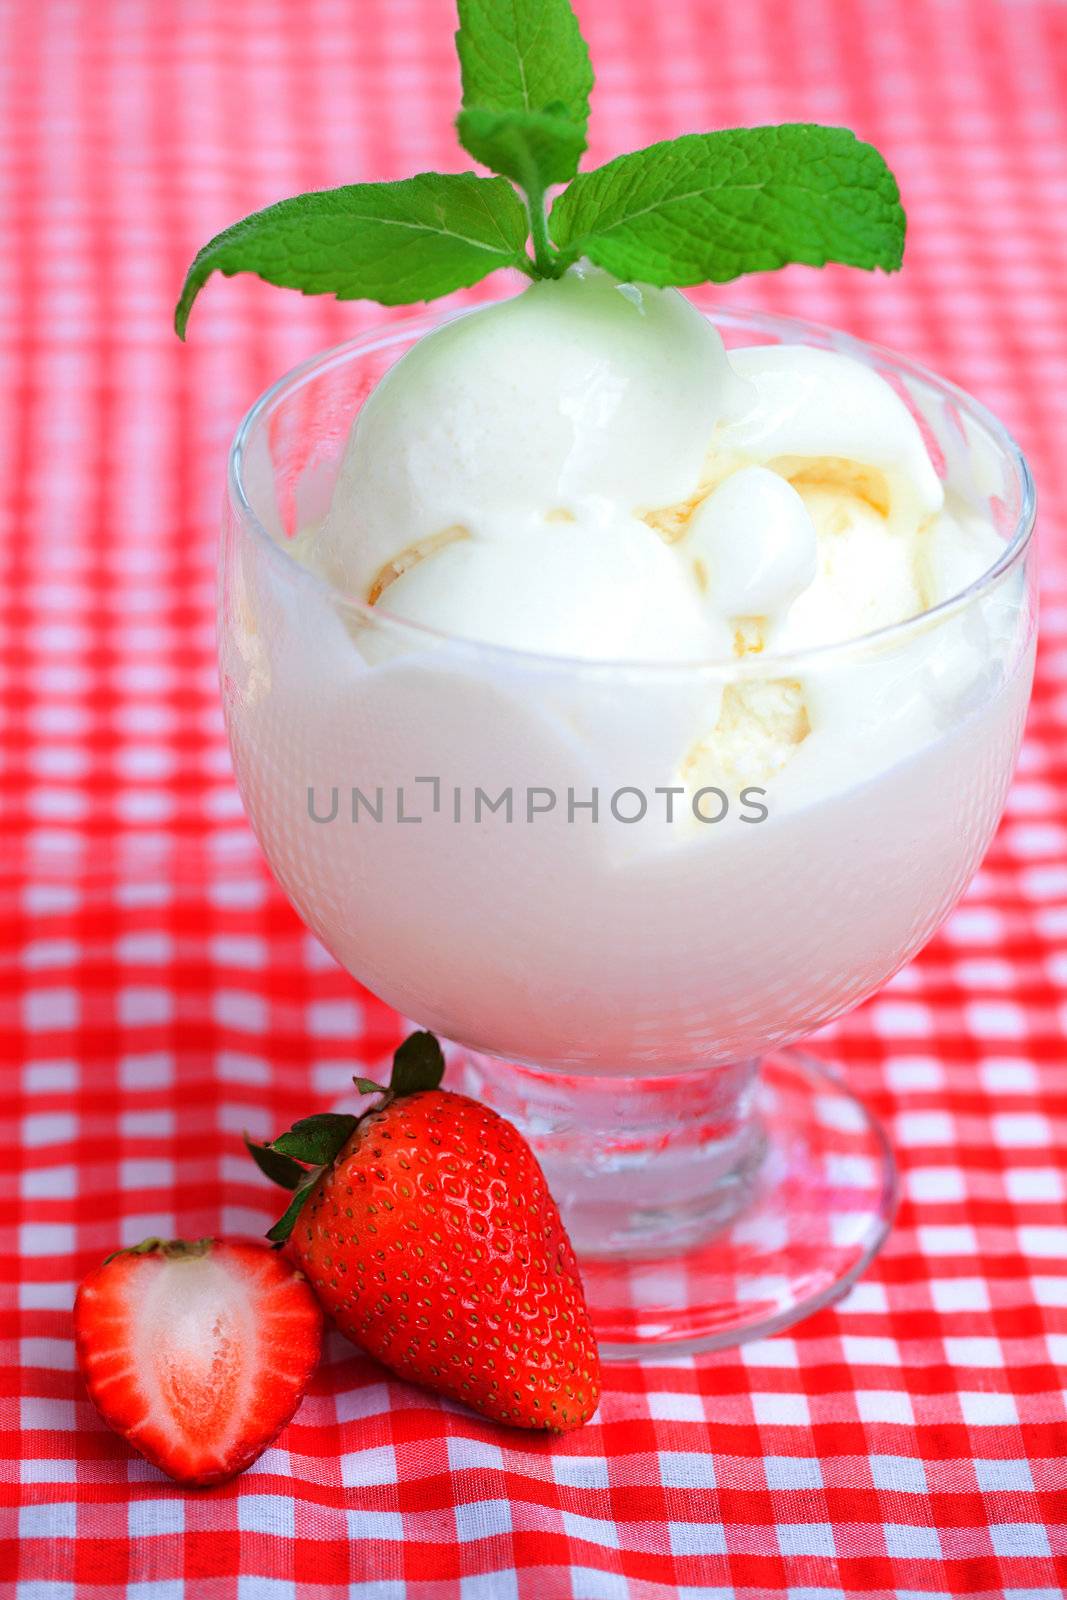 ice cream,strawberry with mint in a glass bowl on plaid fabric